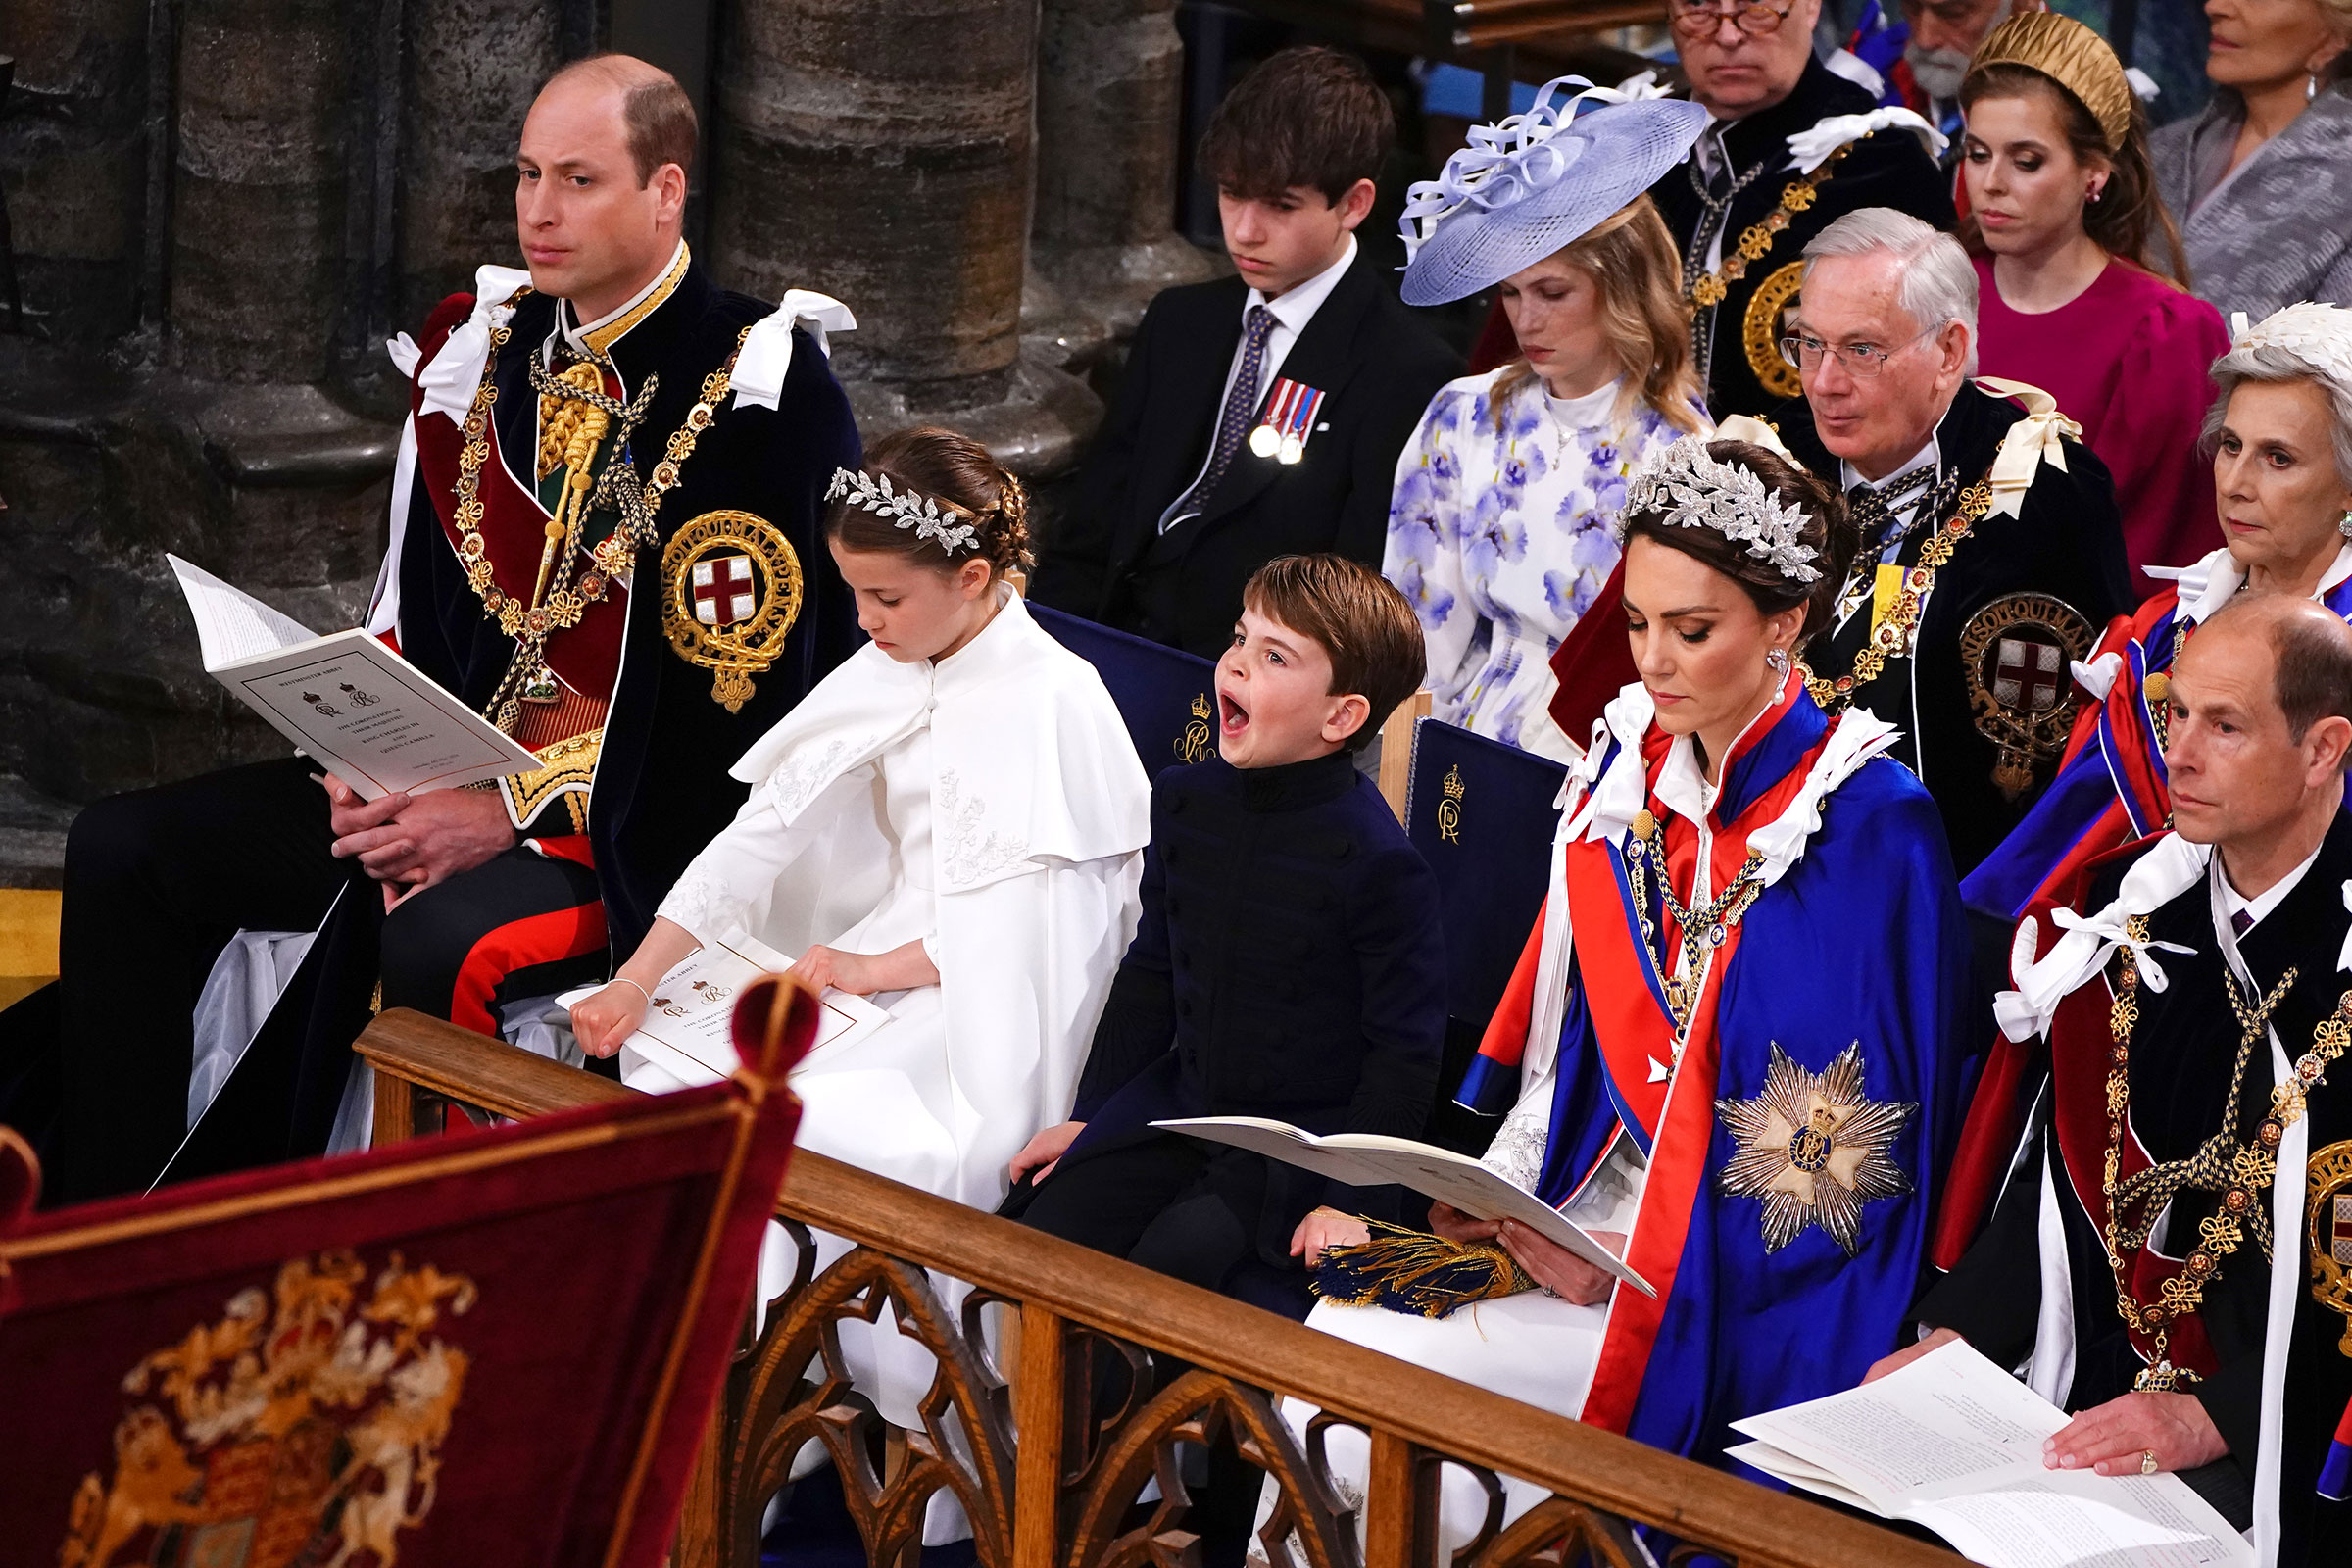 Britain's Prince William, Prince of Wales, Princess Charlotte, Prince Louis, and Britain's Catherine, Princess of Wales, attend the Coronation of King Charles III and Queen Camilla at Westminster Abbey in London on May 6. Charles acceded to the throne on Sept. 8, 2022, upon the death of his mother, Elizabeth II.